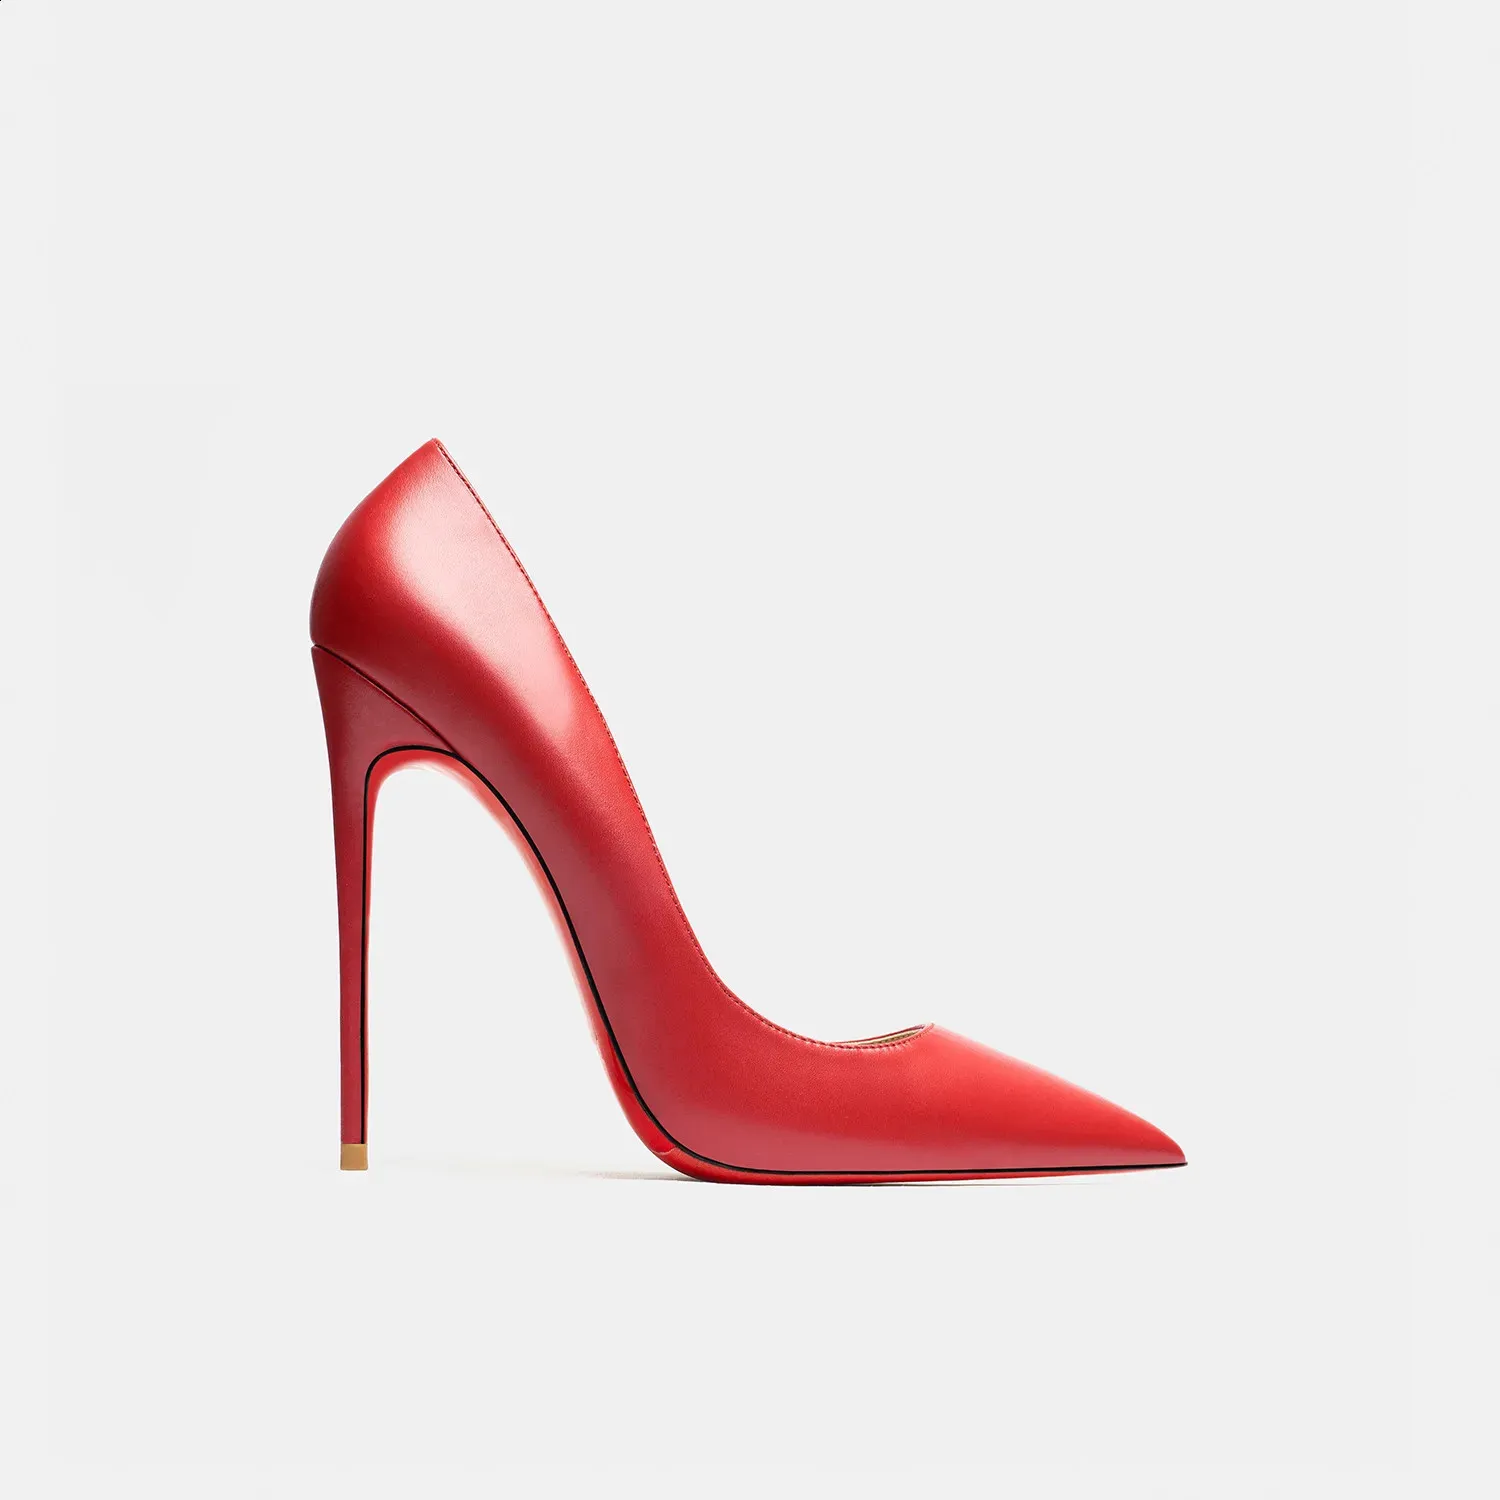 Shoes Luxury|luxury Red Bottom Pointed Toe Pumps For Women - Wedding Heels